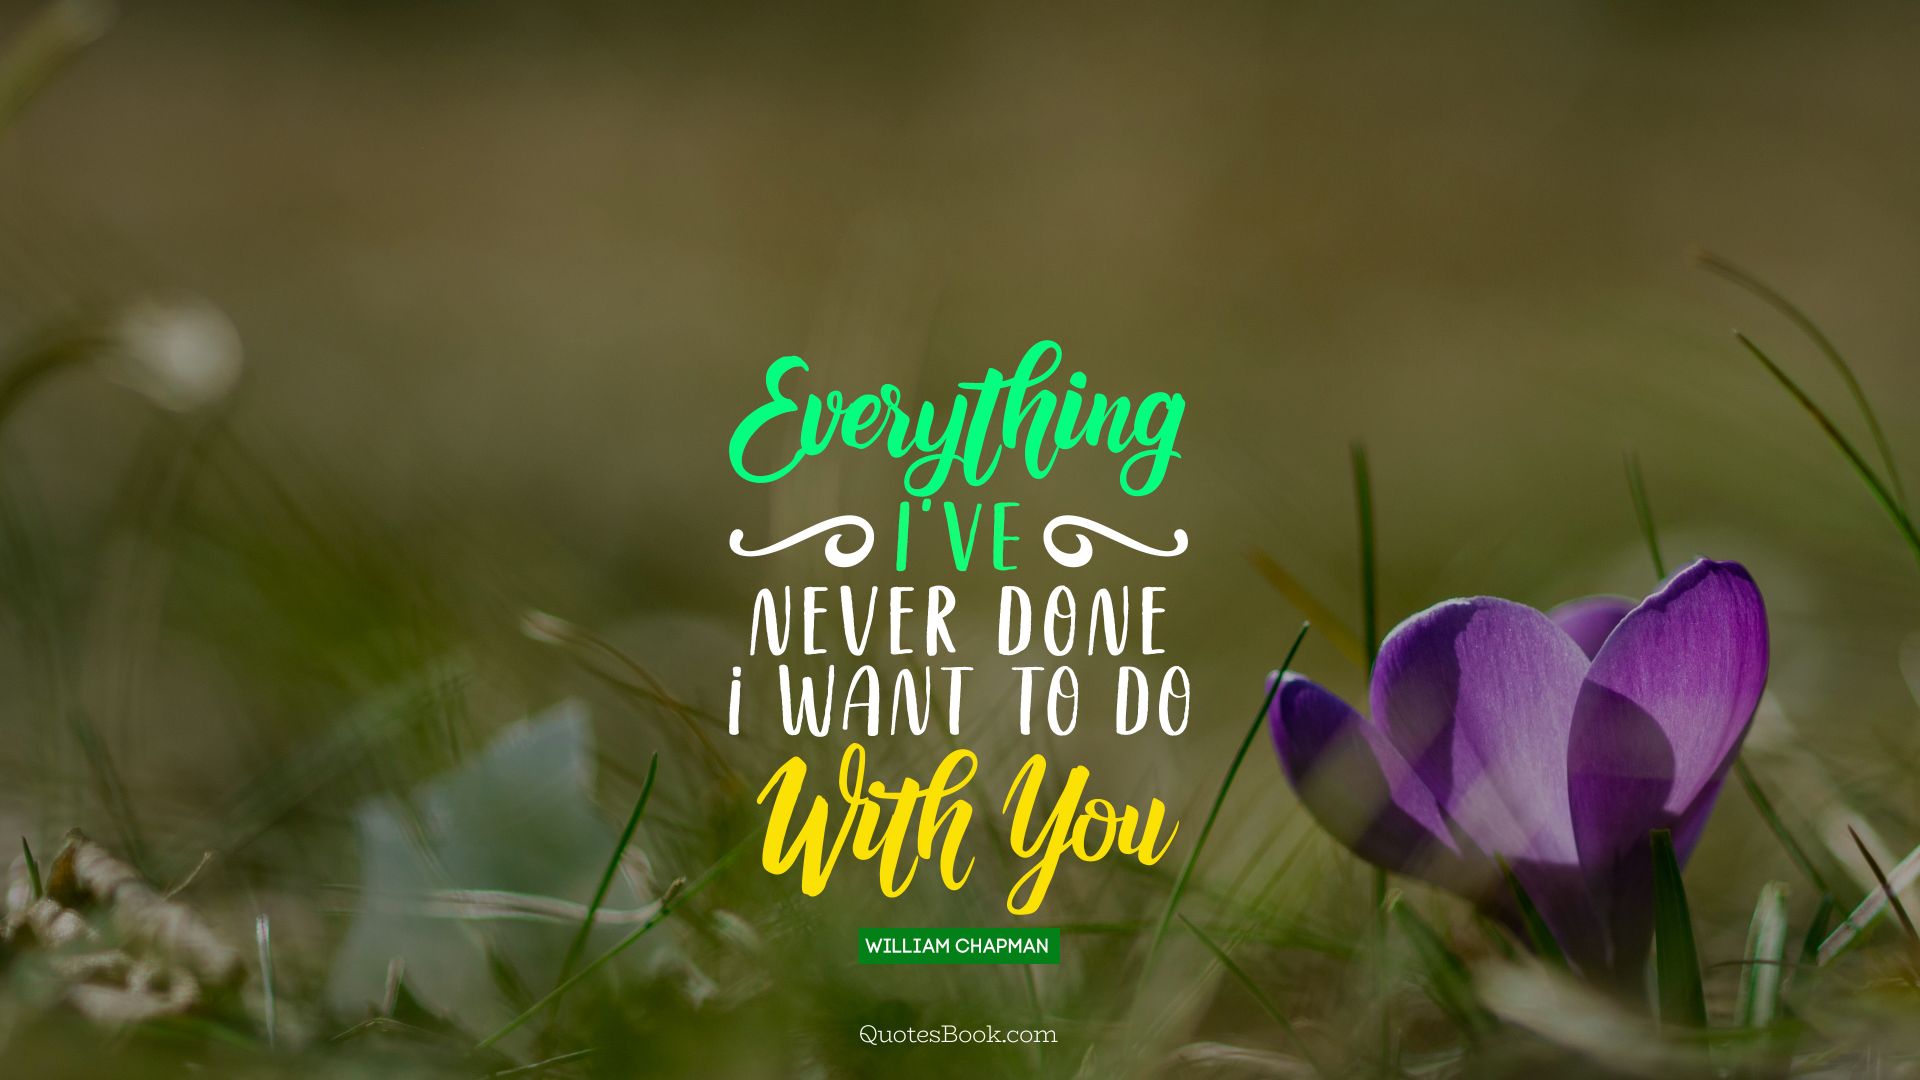 Everything i've never done i want to do with you. - Quote by William Chapman